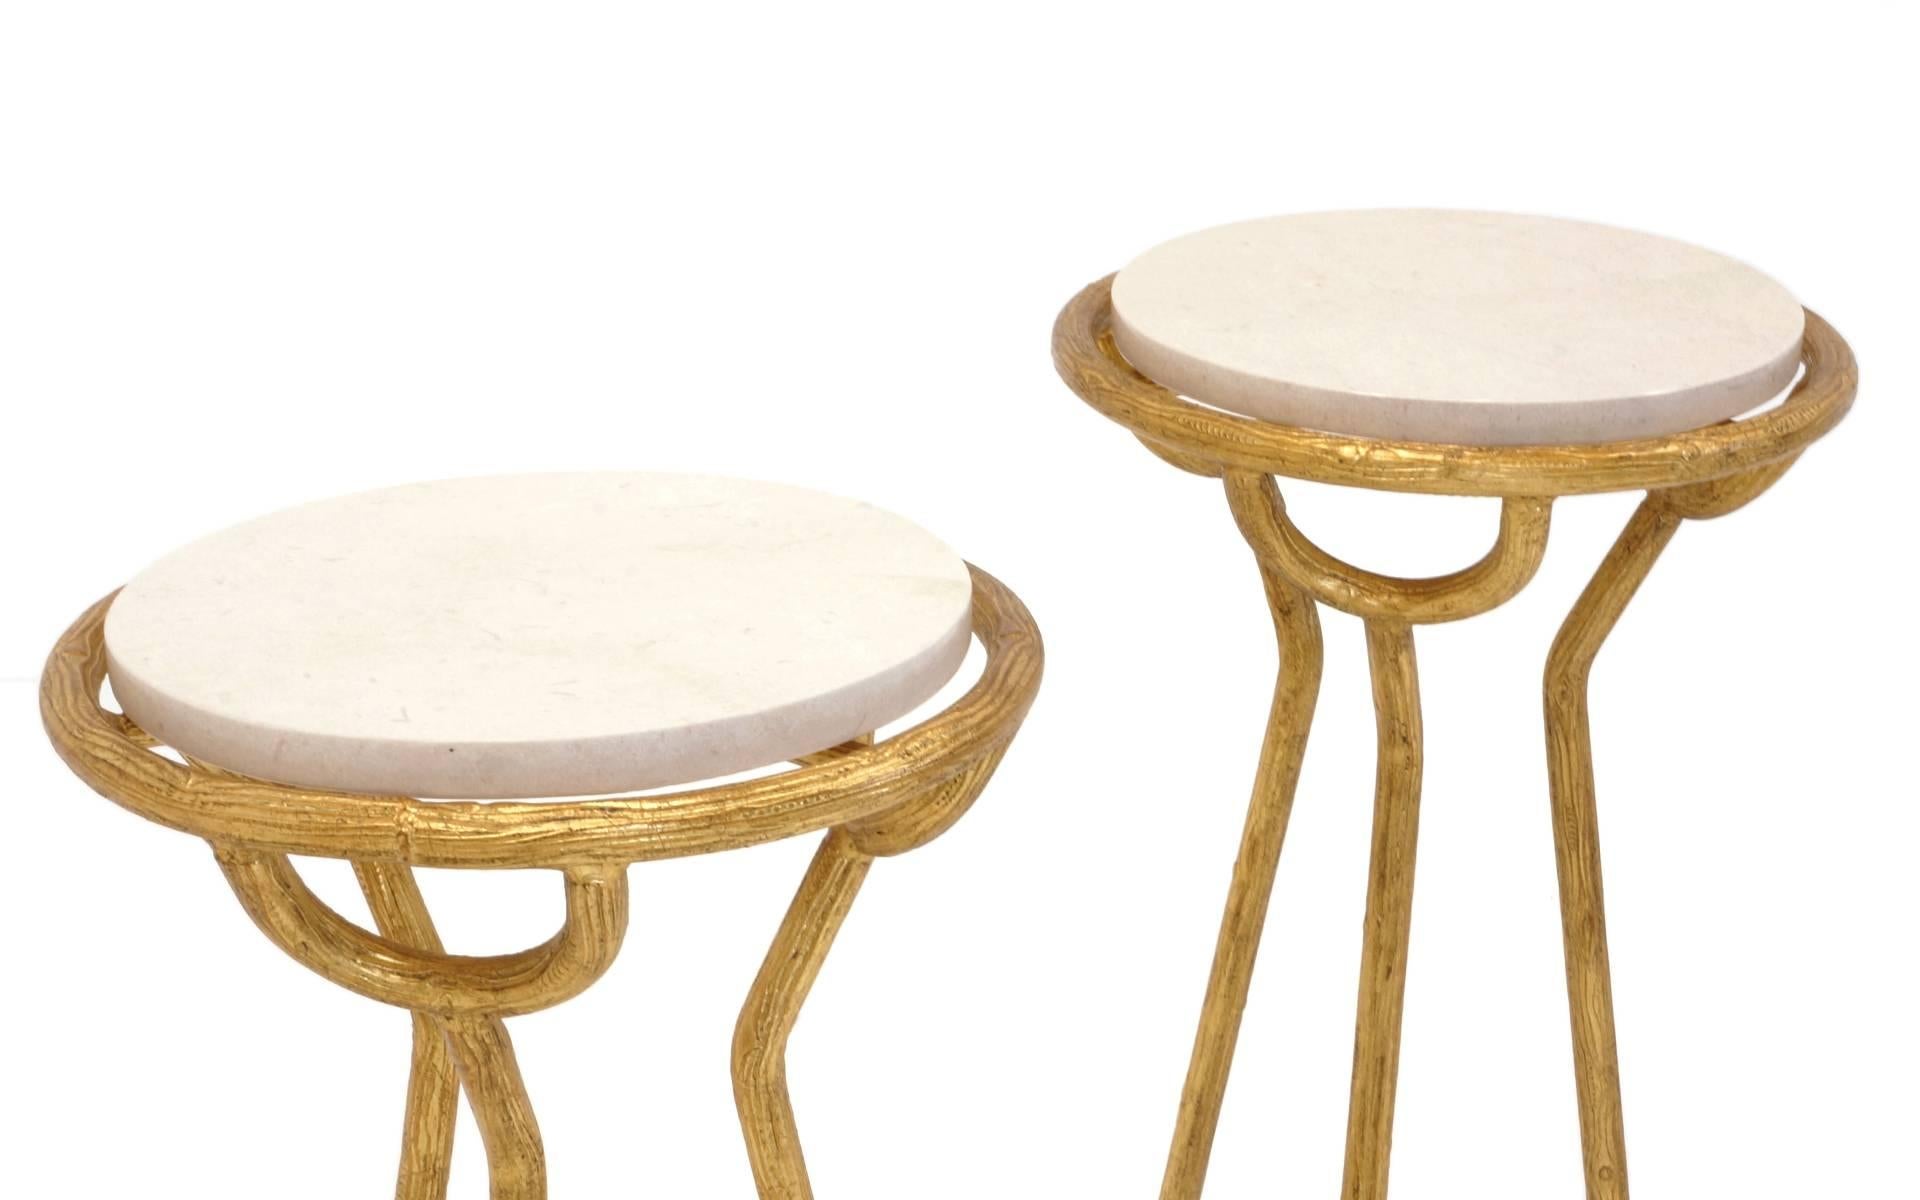 Hollywood Regency Elegant Italian Gold Gilded Side Tables with Travertine Tops